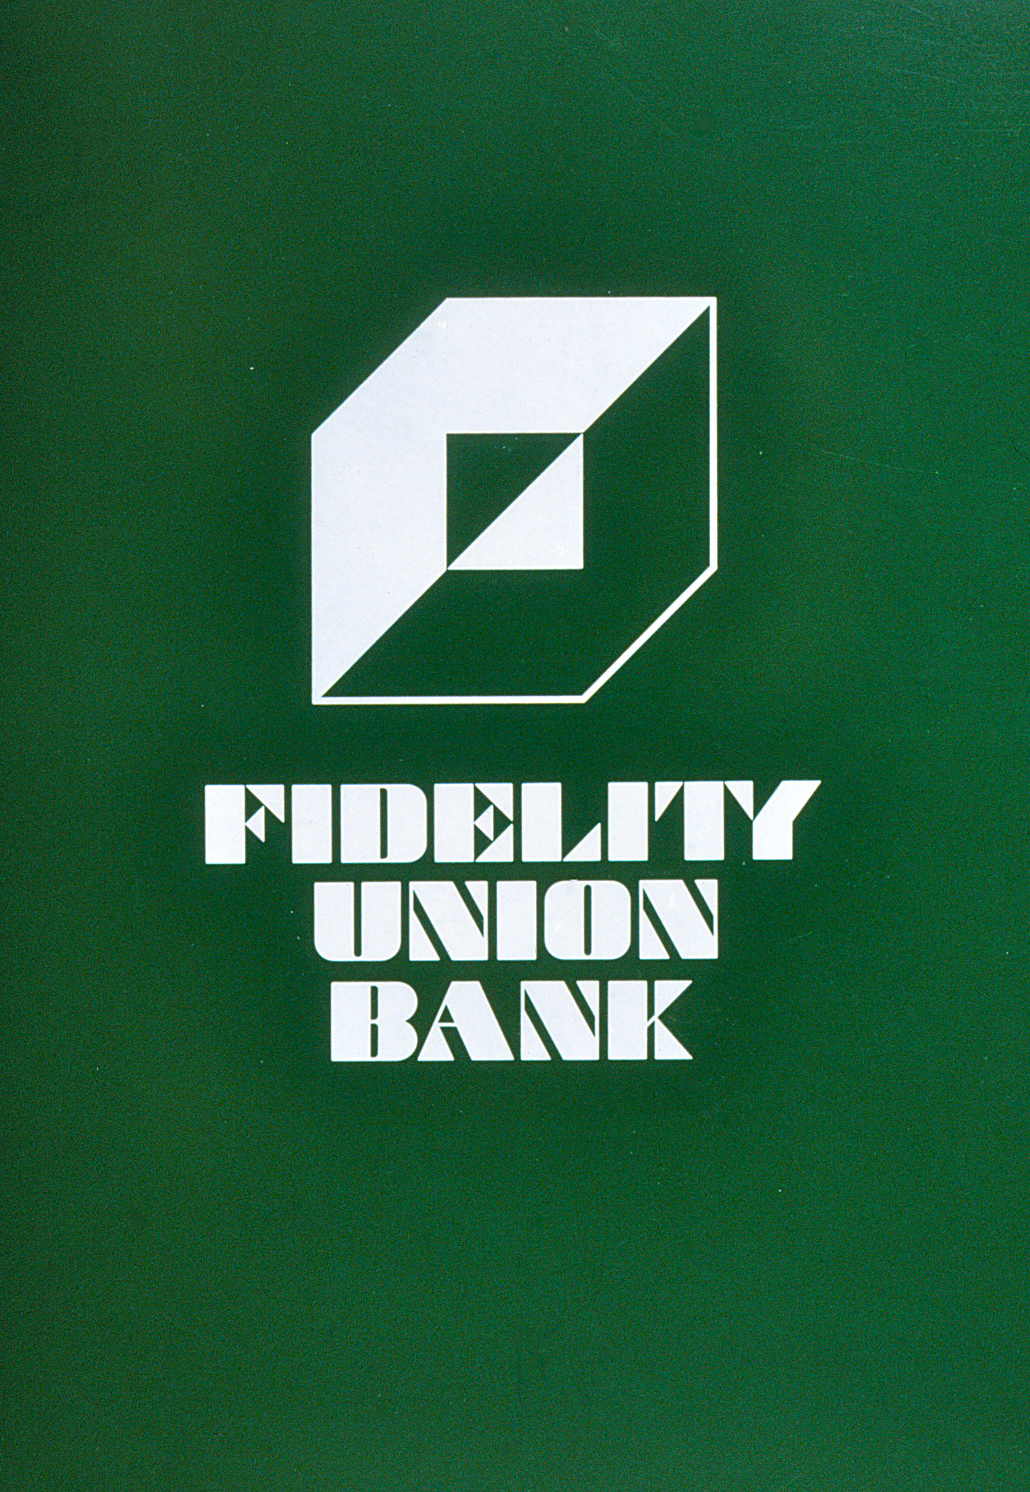 Green and white logo with typeface beneath it.